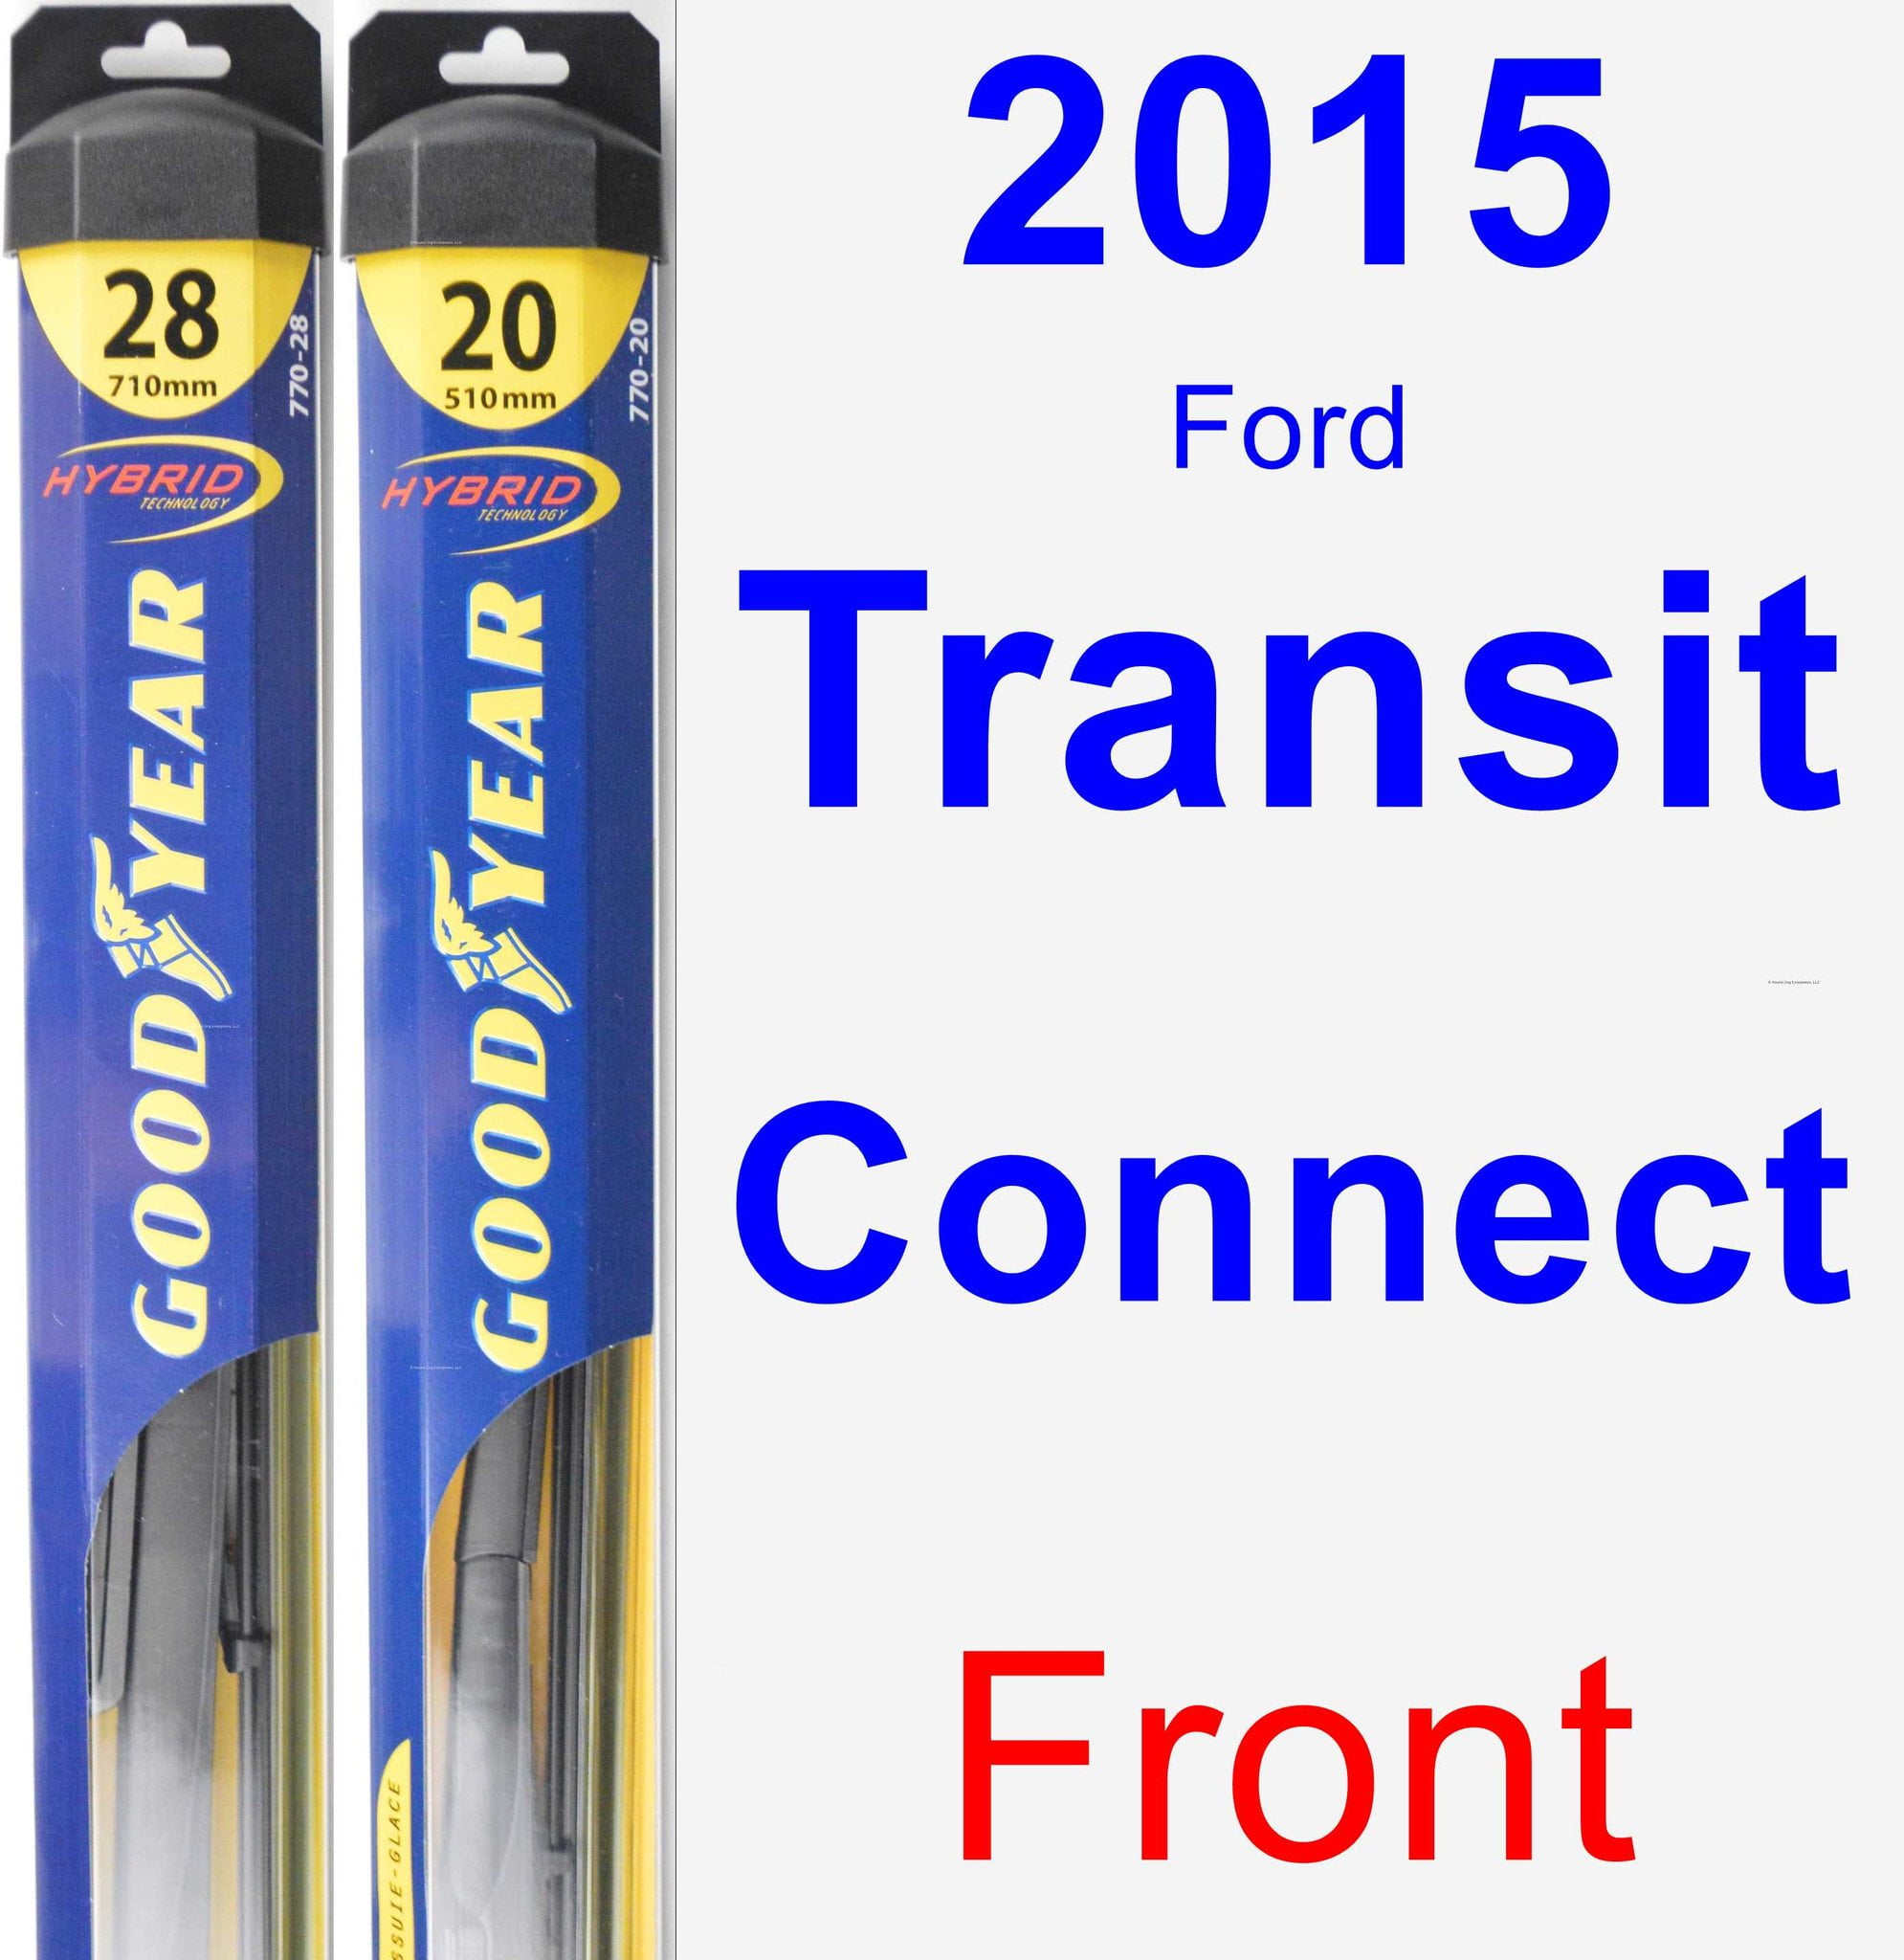 2015 Ford Transit Connect Wiper Blade Set/Kit (Front) (2 Blades) - Hybrid - Walmart.com 2015 Ford Transit Connect Wiper Blade Size